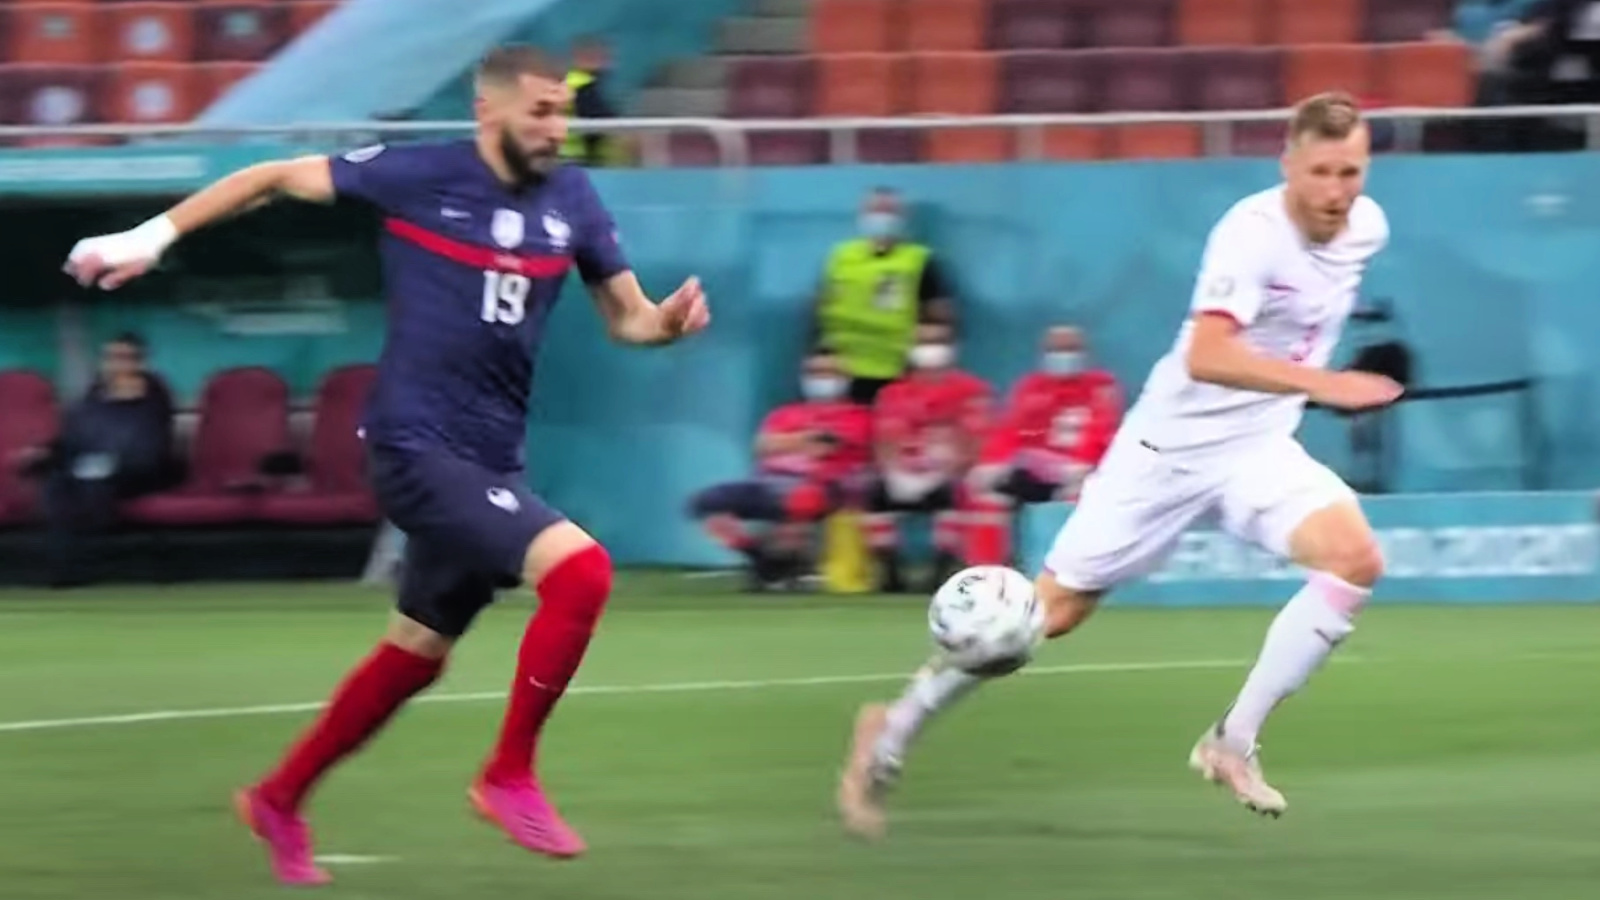 Watch: Karim Benzema rescues calamity pass with legendary touch